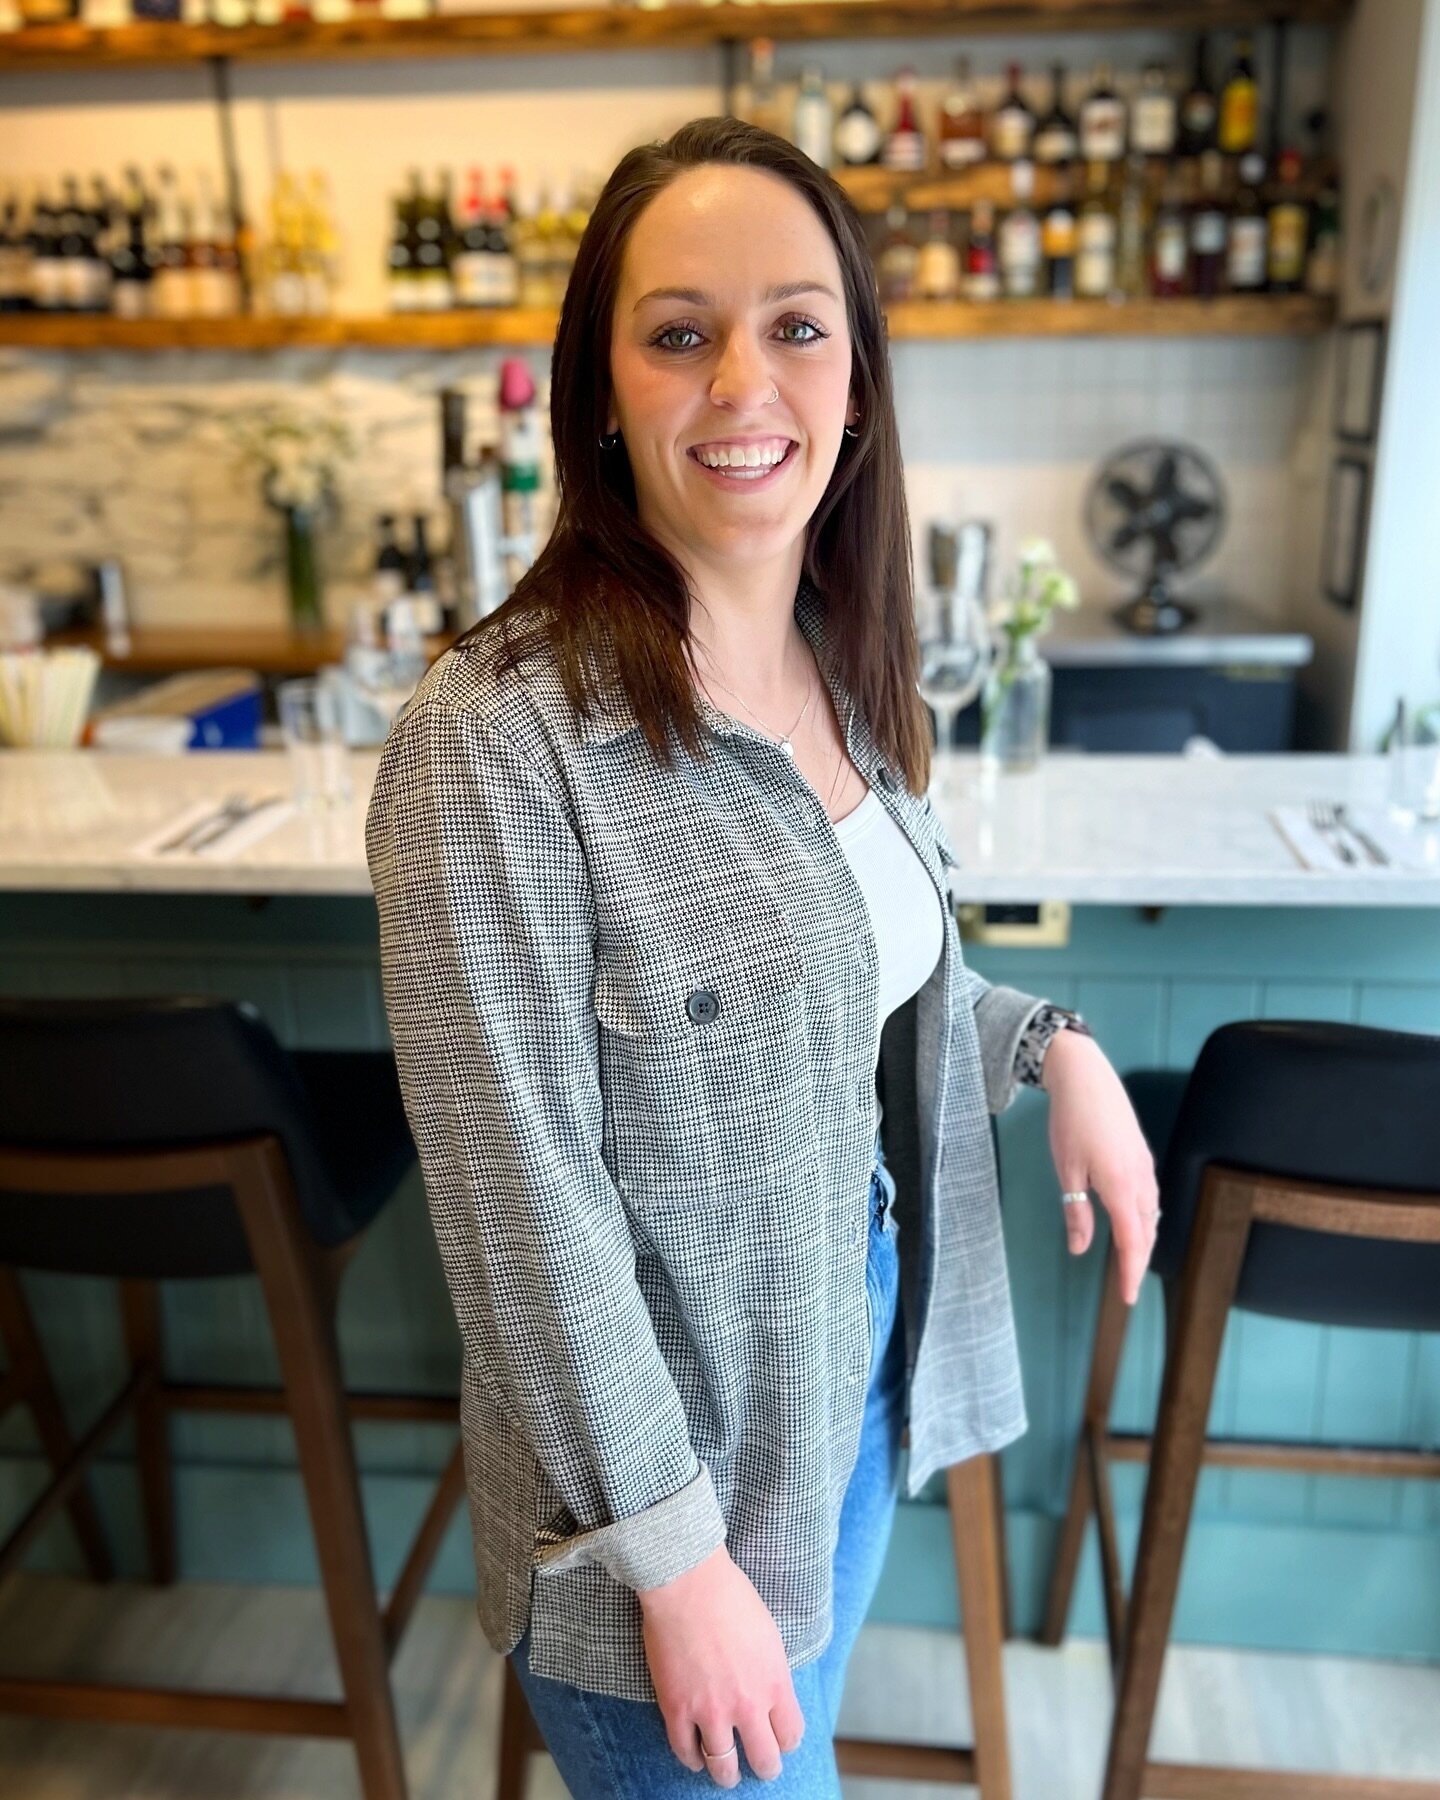 🎉🎈🥂 BIG MILESTONE &amp; BIG ANNOUNCEMENT &gt;&gt; First off, we wanted to say a huge congrats to Jen Keays on her 5-year anniversary of working at The Canteen! We also thought that this would be the perfect time to announce Jen&rsquo;s promotion t